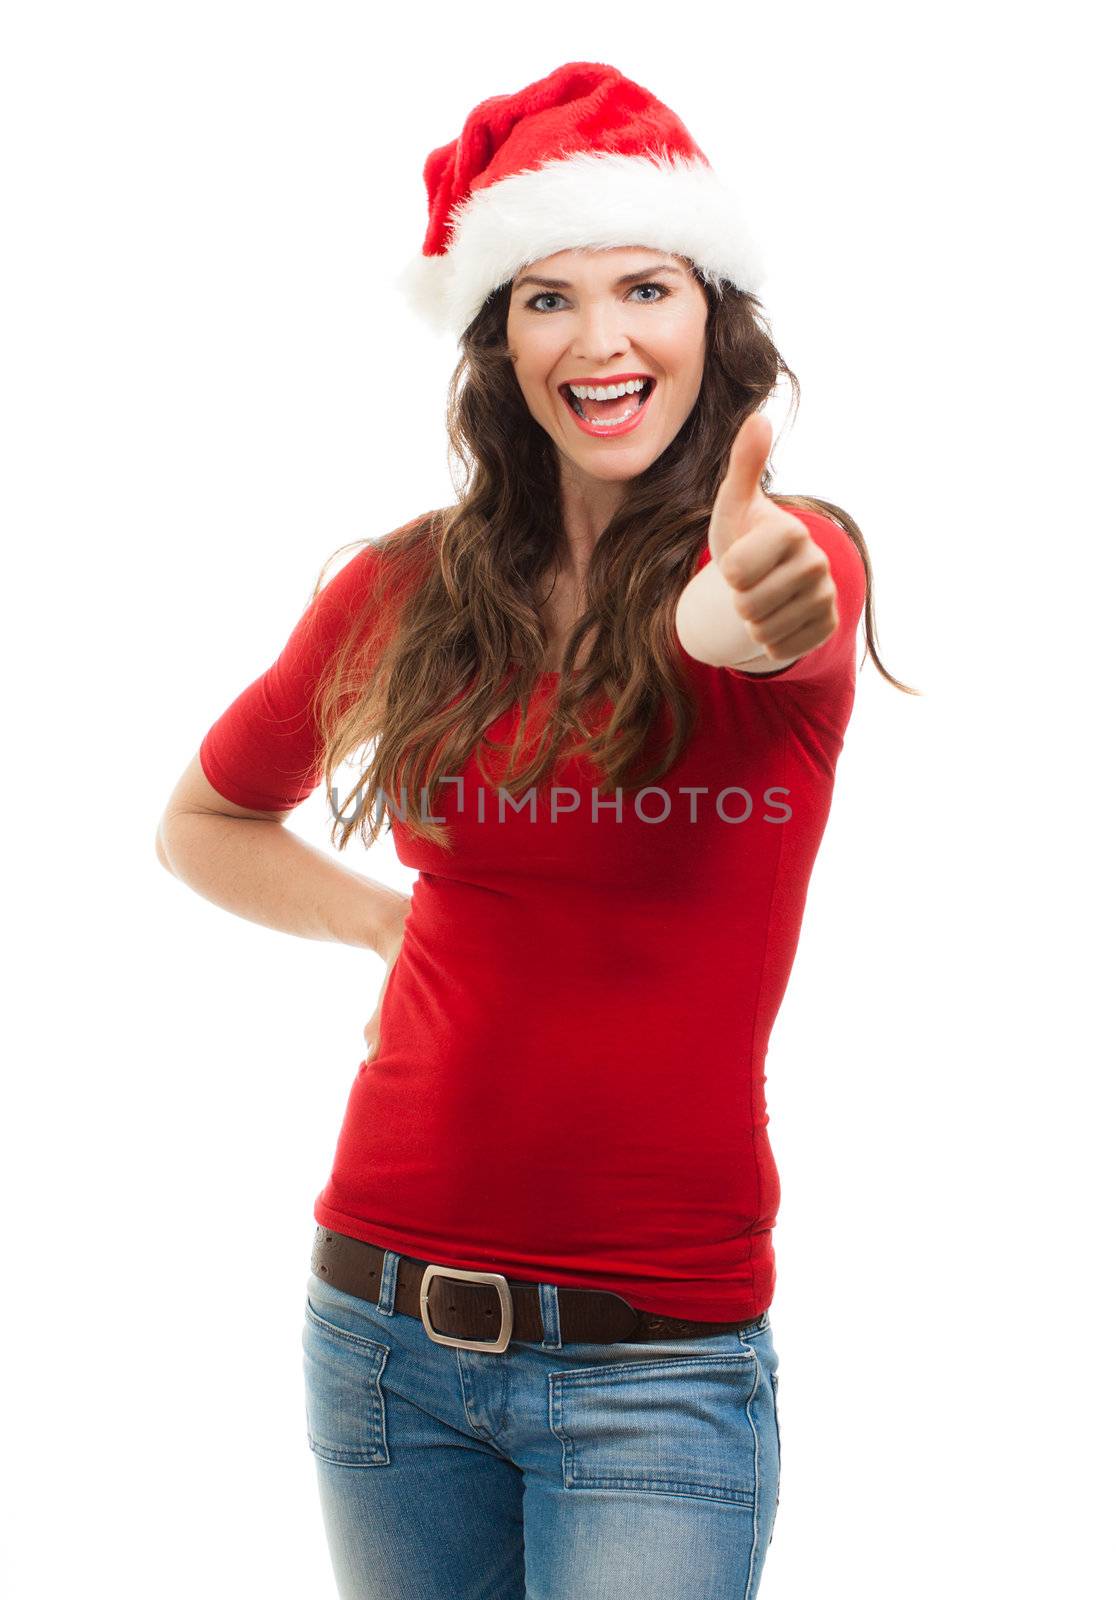 Woman in Santa hat gives thumbs up. by Jaykayl